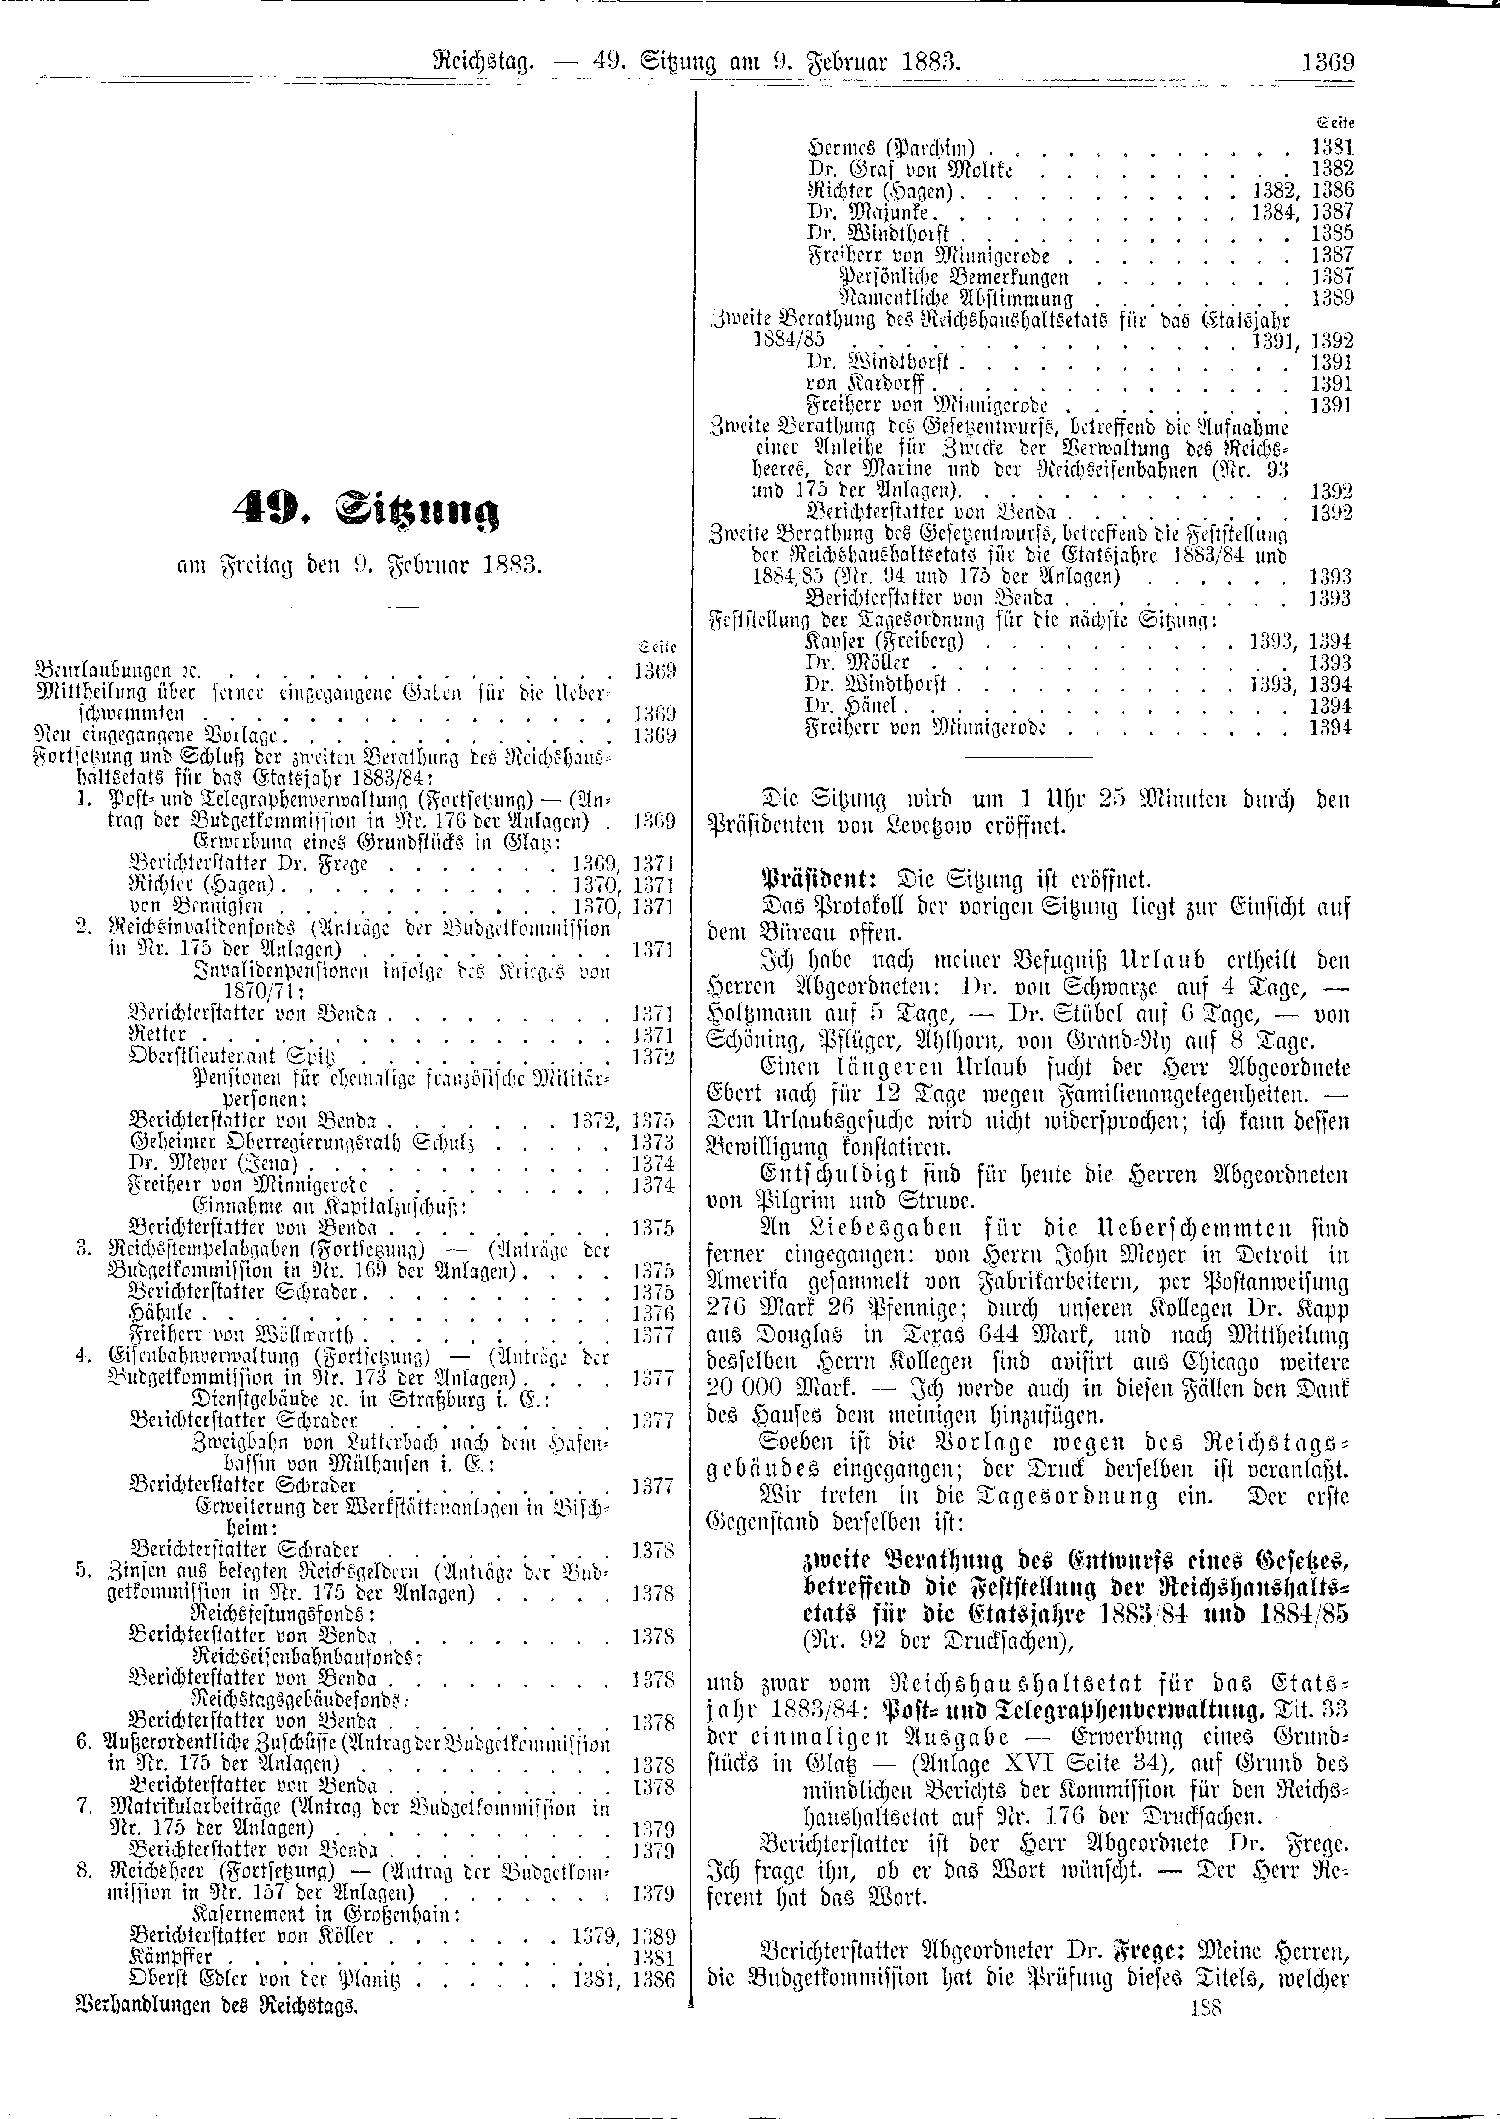 Scan of page 1369